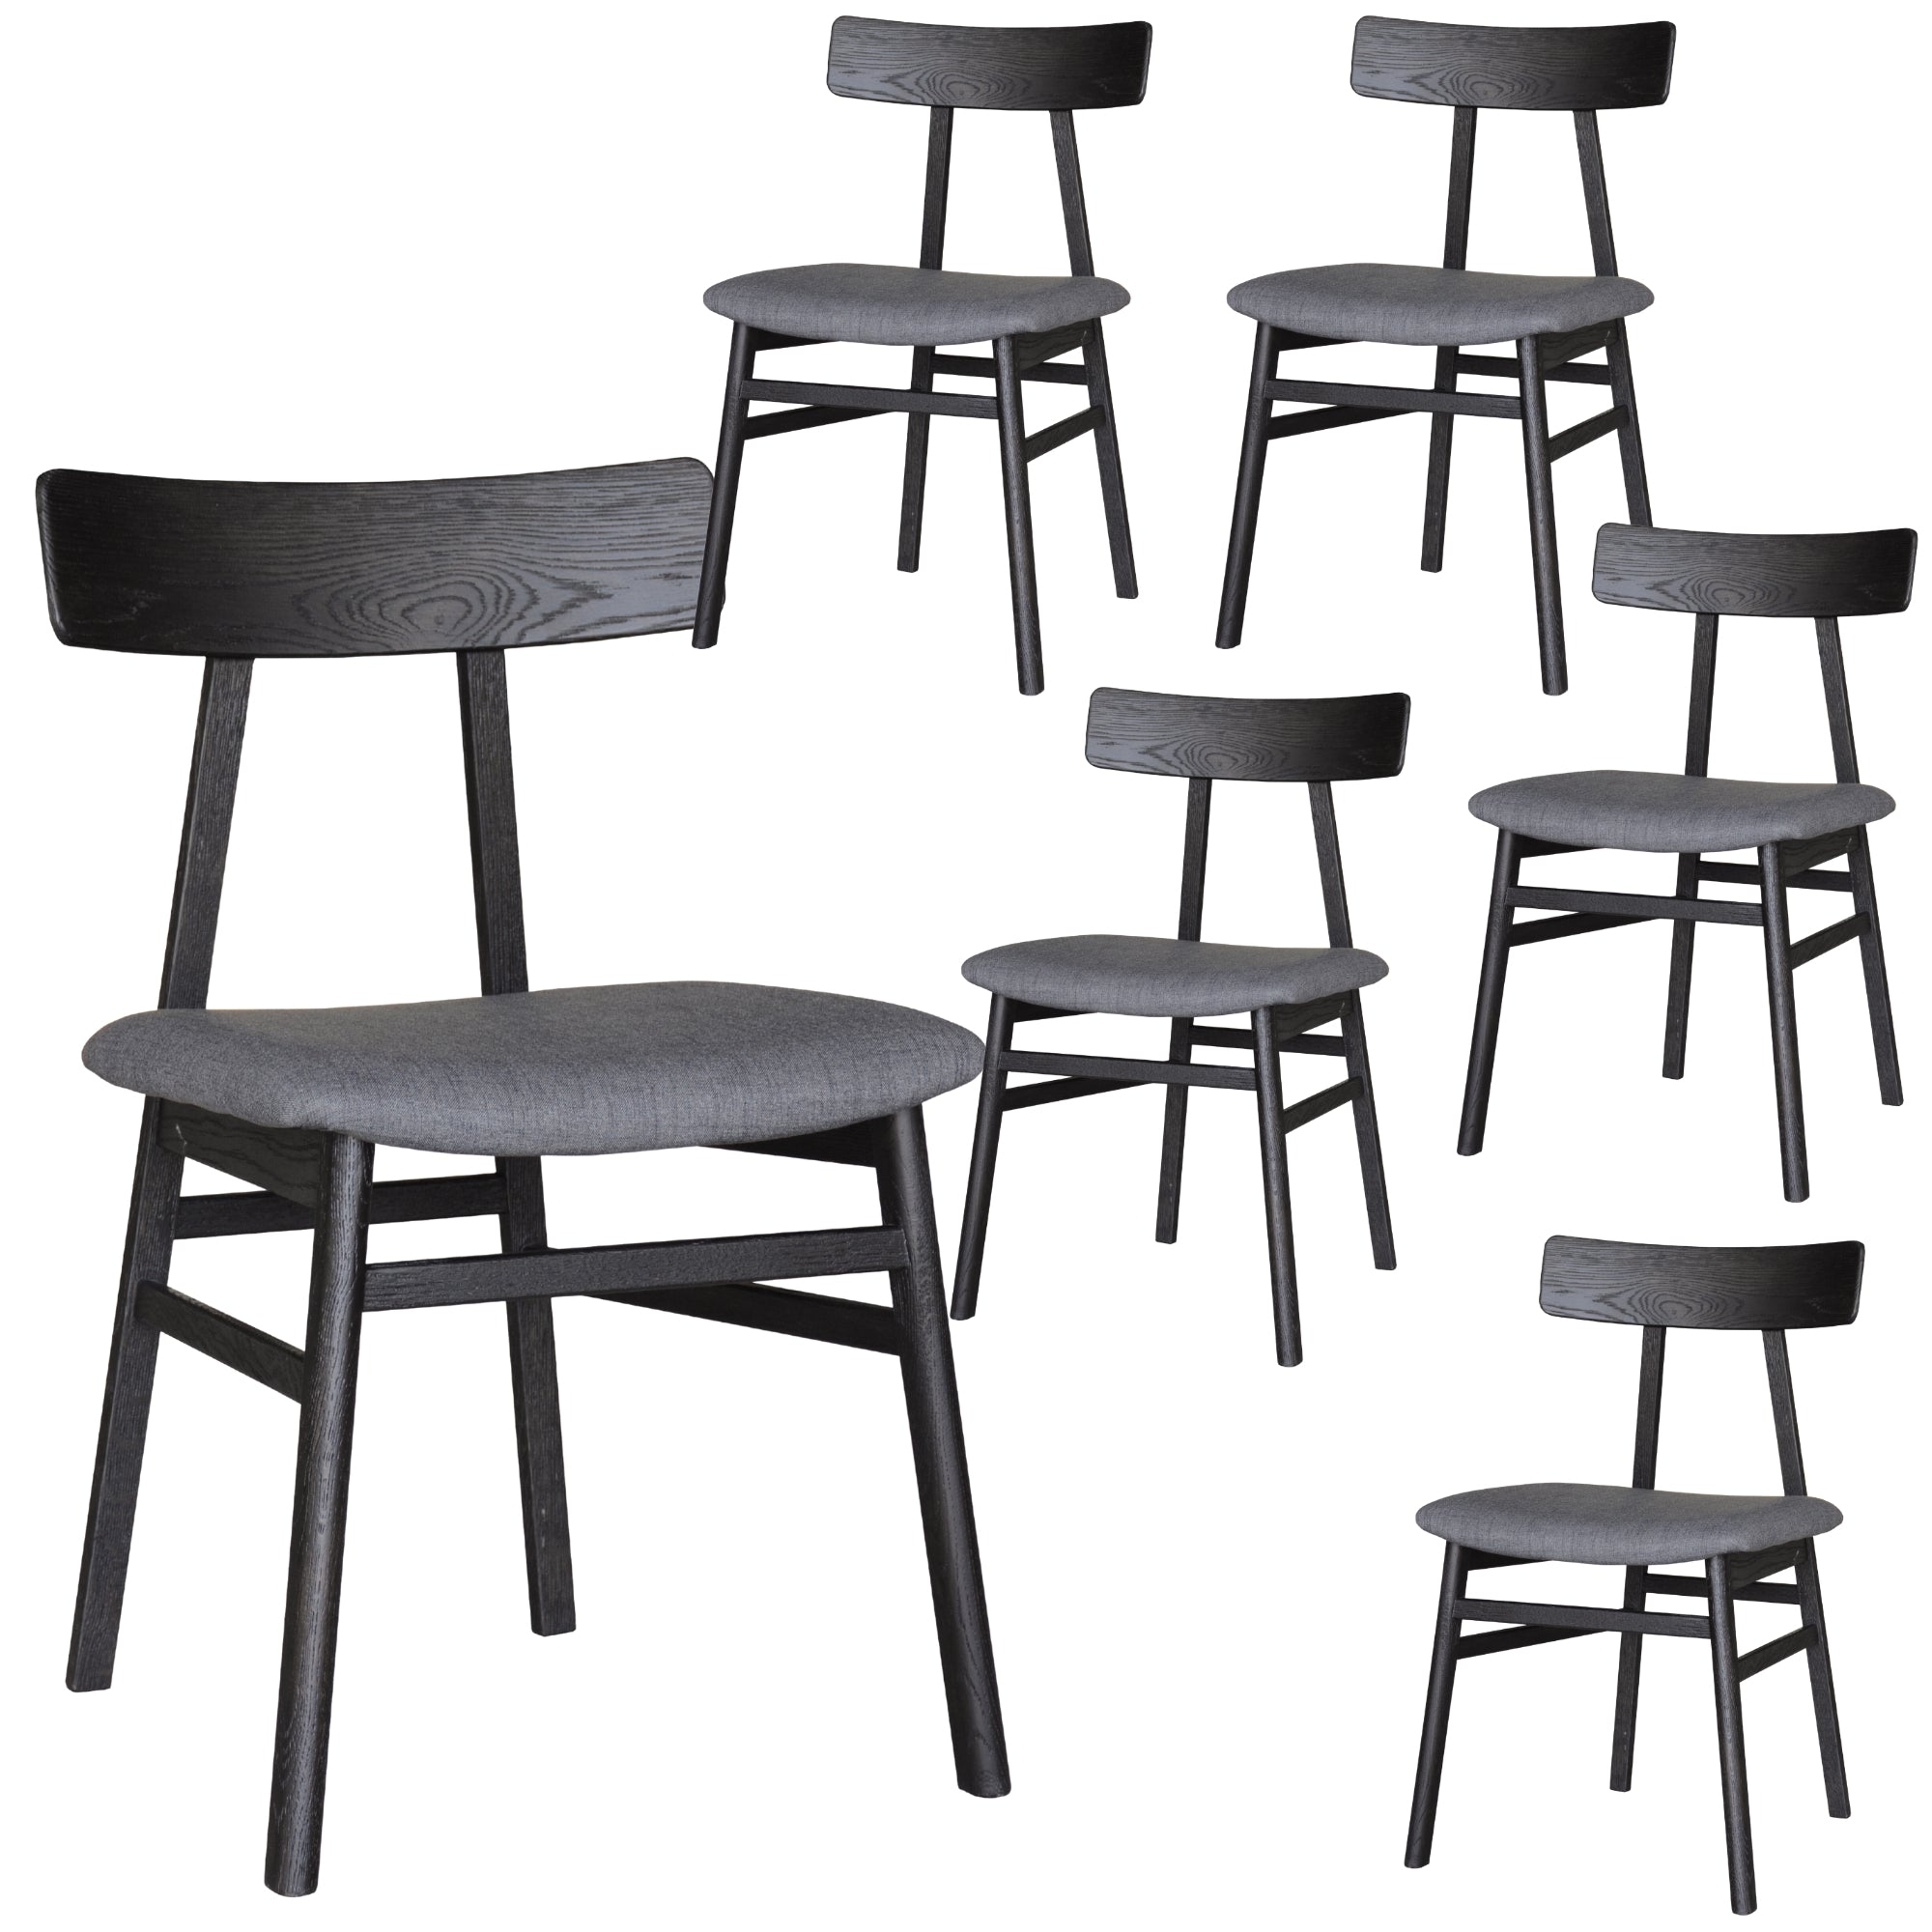 6pc Black Oak Dining Chairs Set Fabric Seat Industrial Style